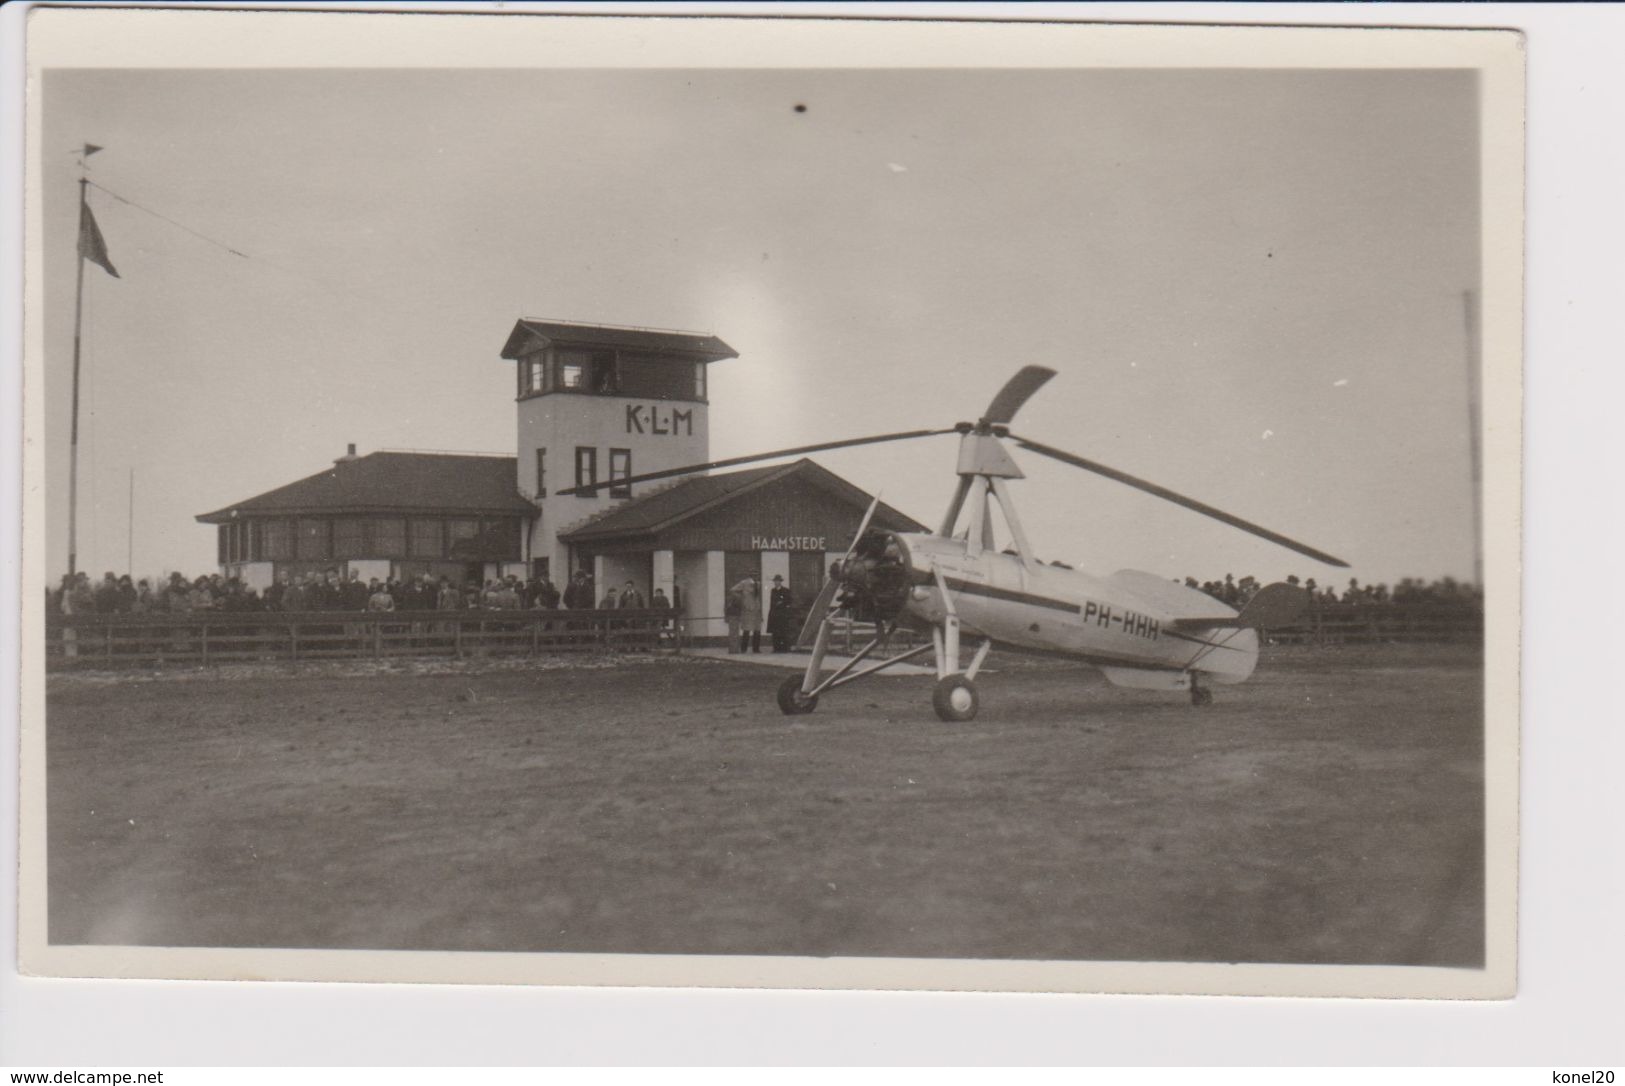 Vintage Rppc KLM Hotel-Rest-cafe @ Haamstede Airport With Auto Giro Aircraft Number 4 - 1919-1938: Between Wars